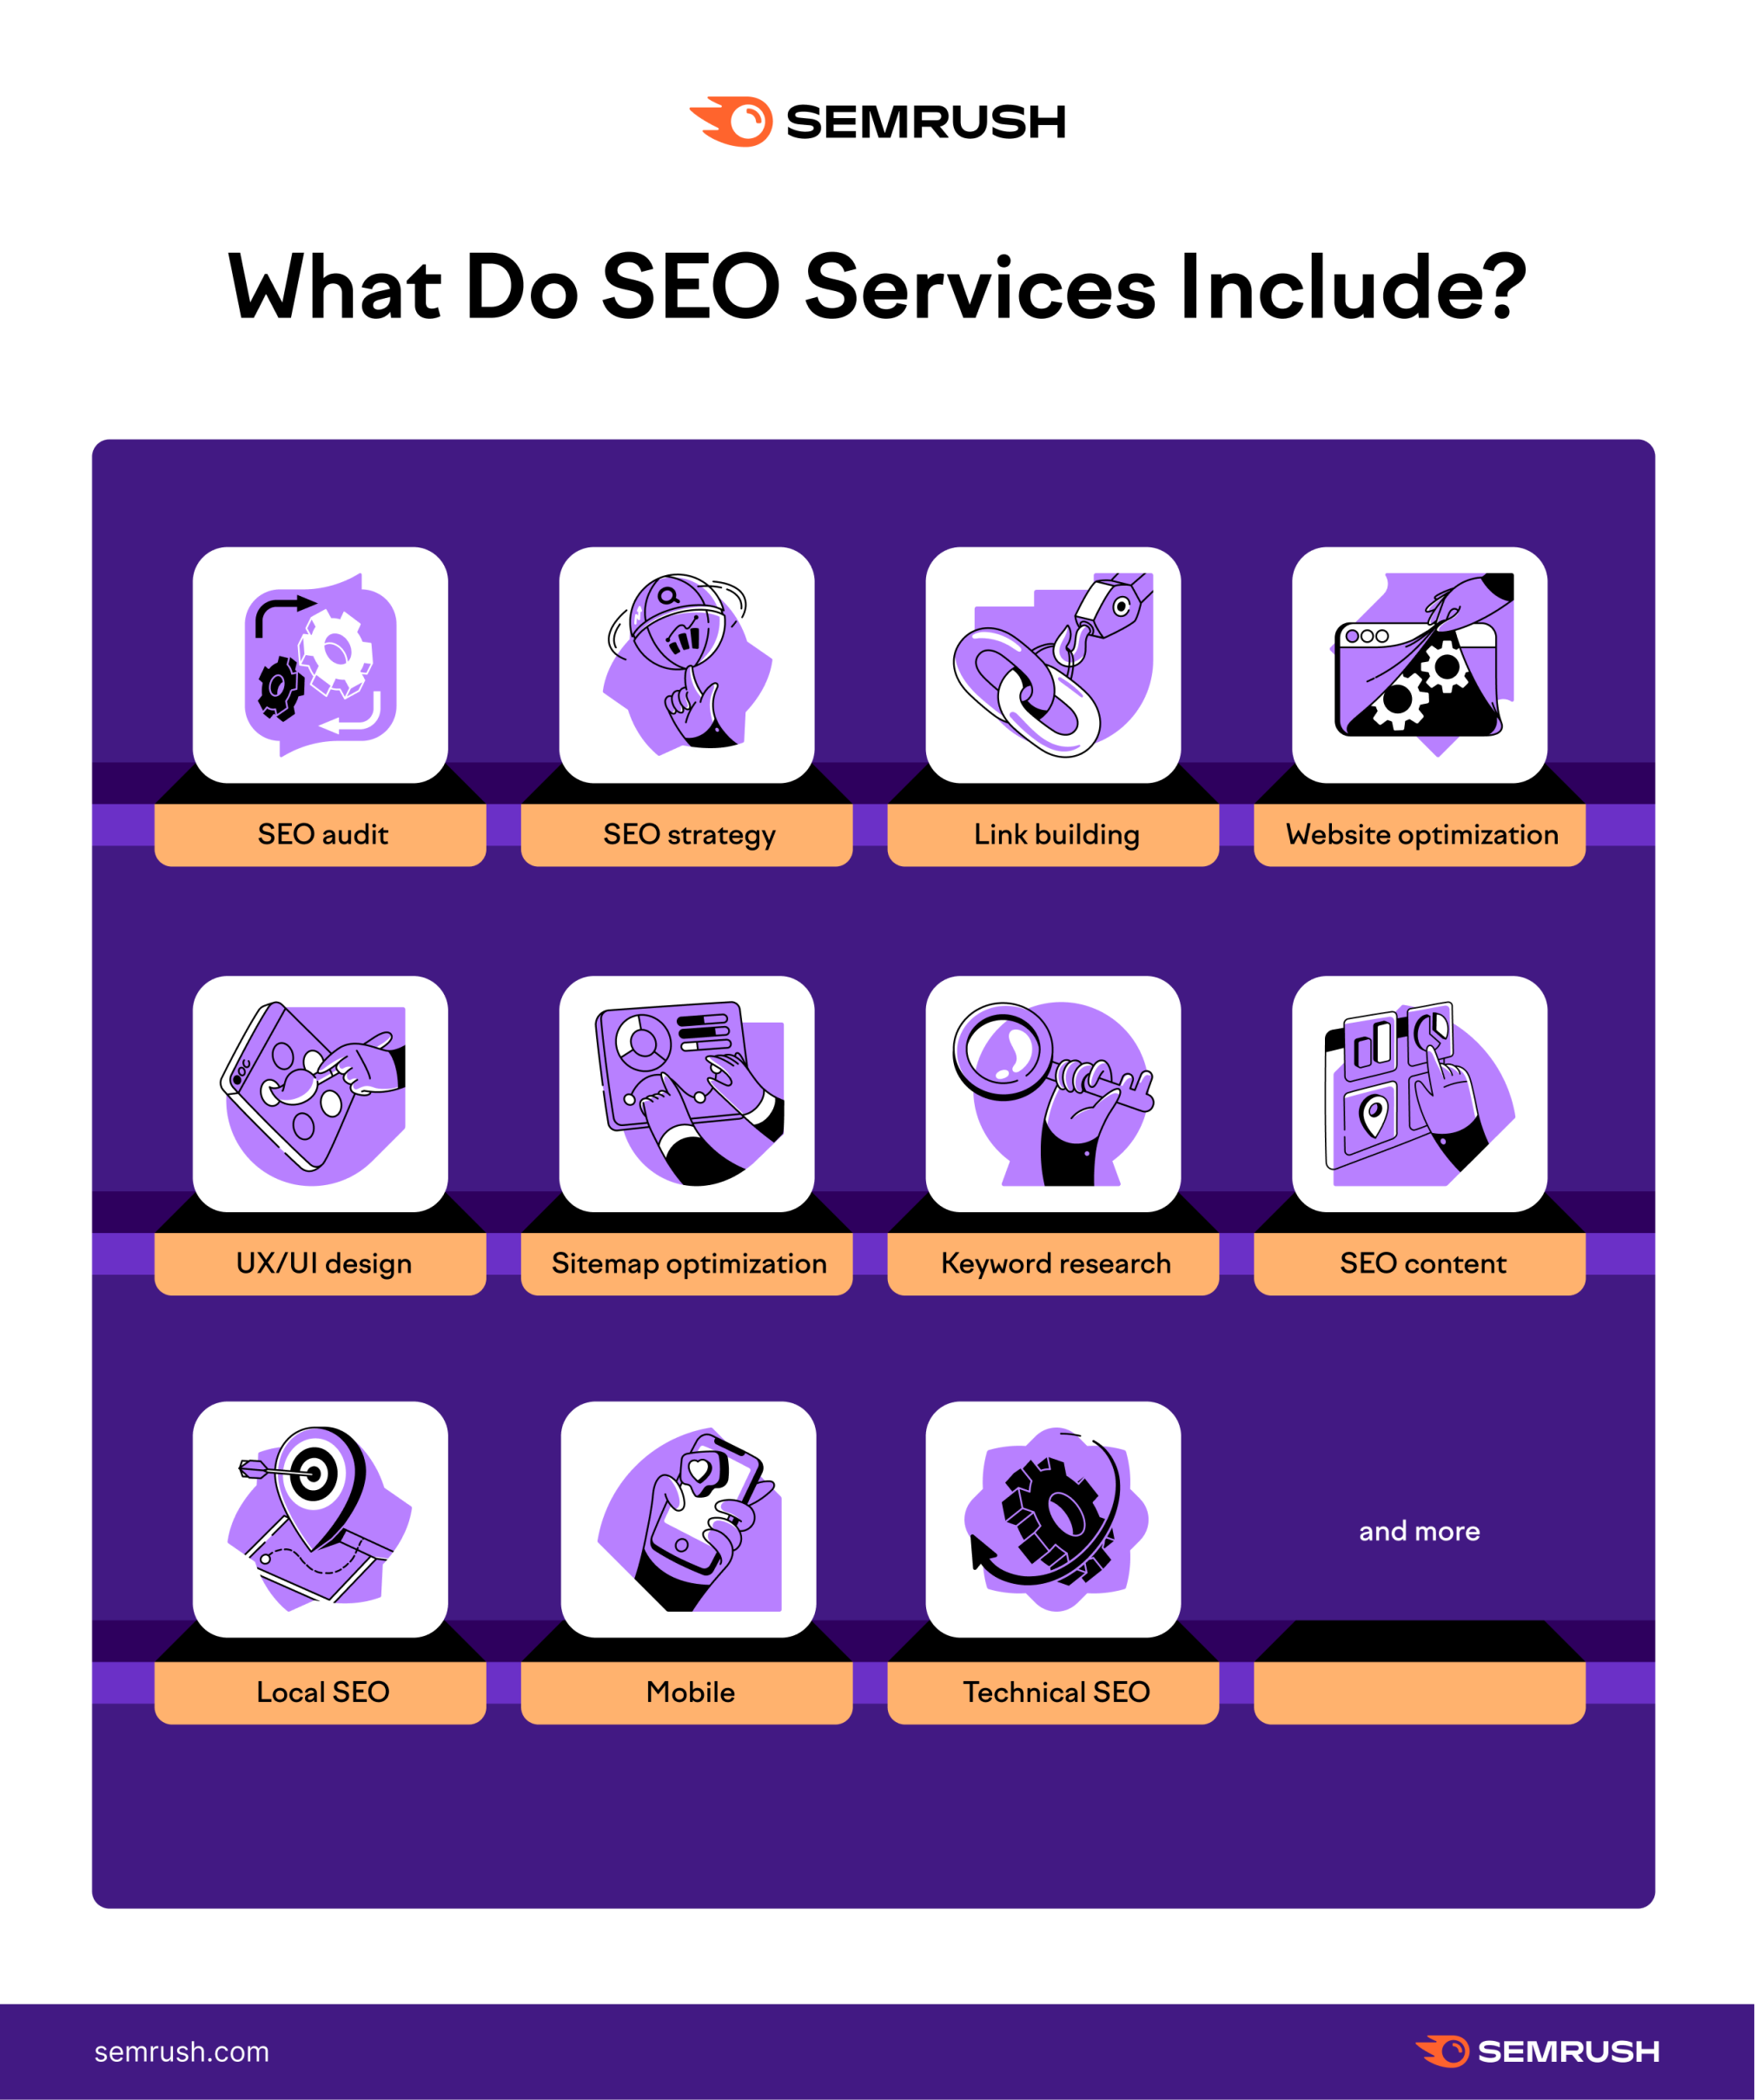 What are SEO services?